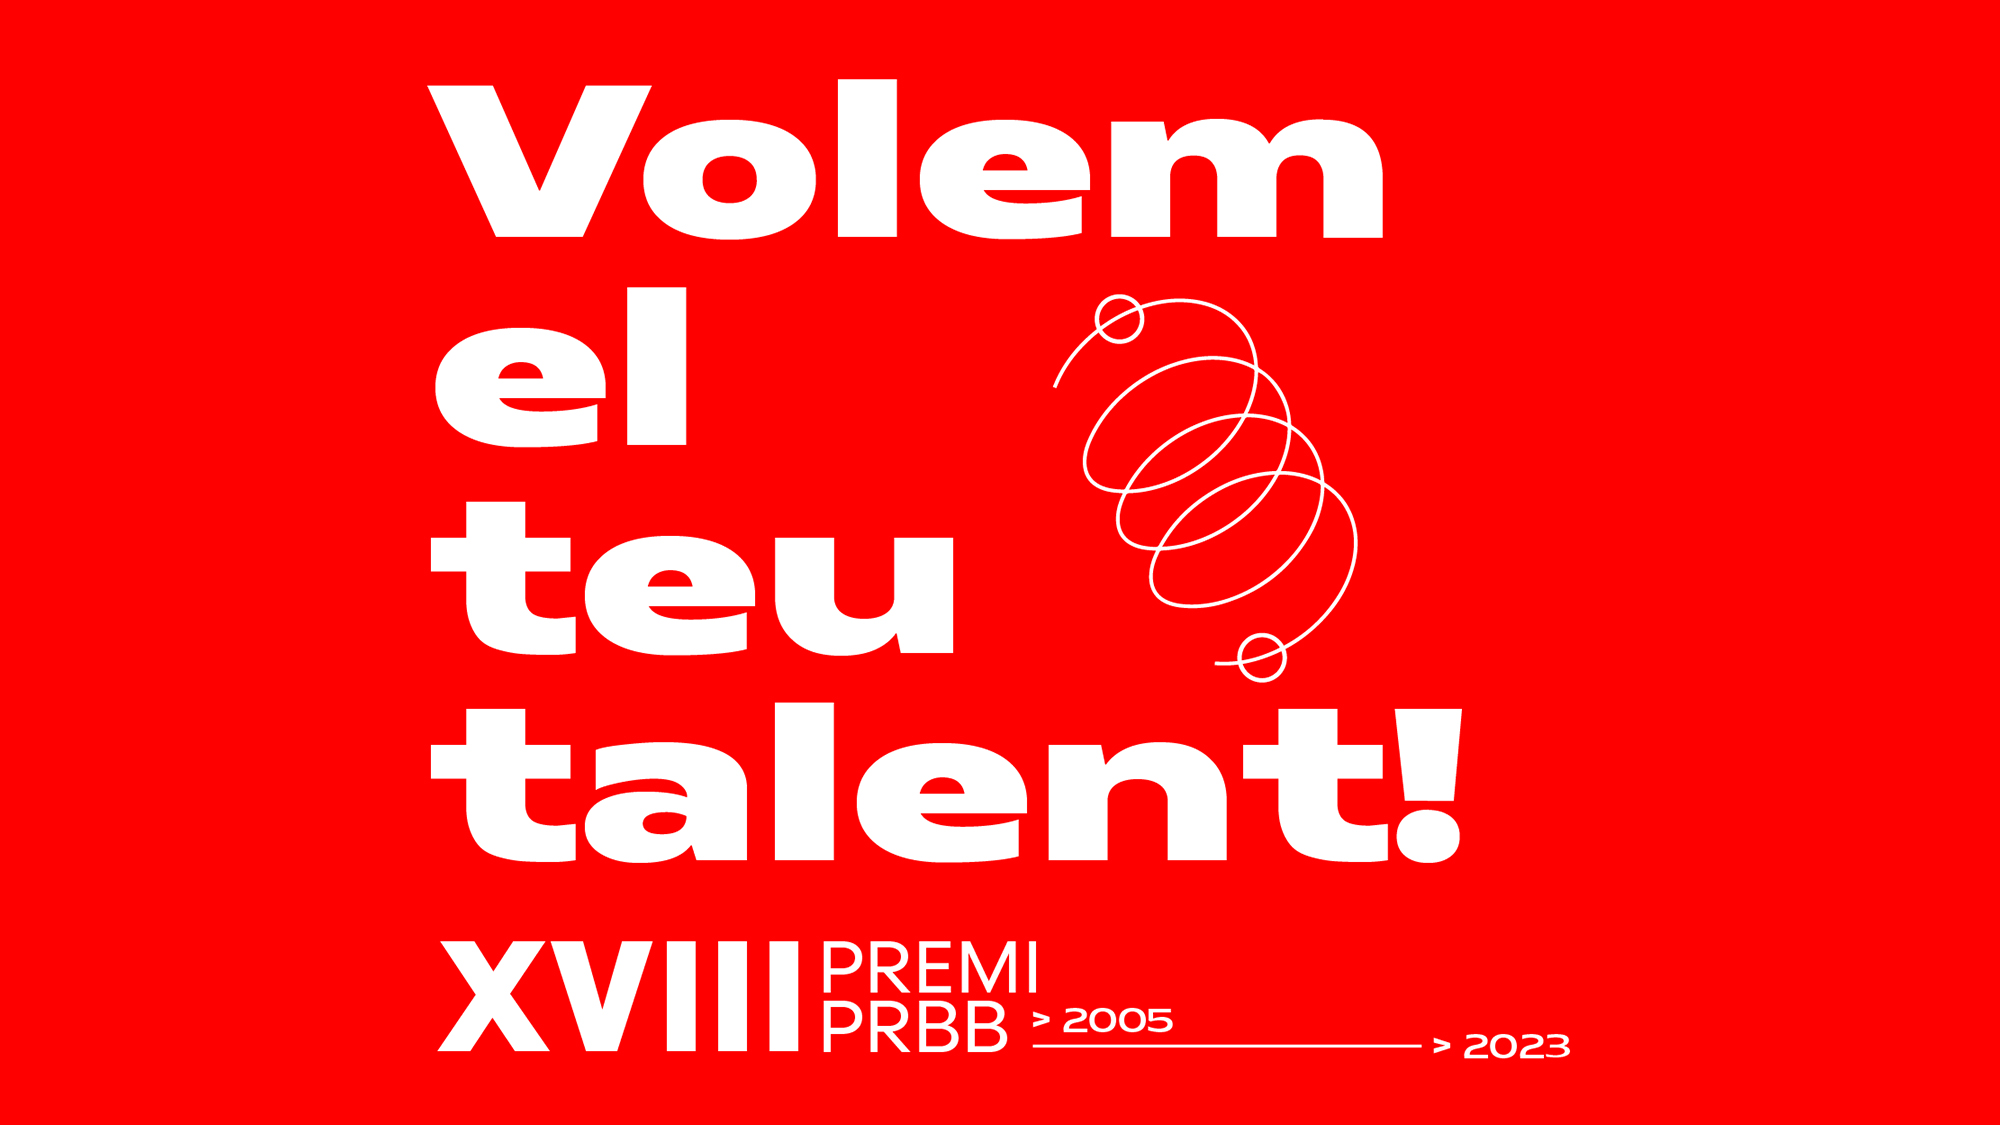 The call for the XVIII edition of the PRBB Award is now open